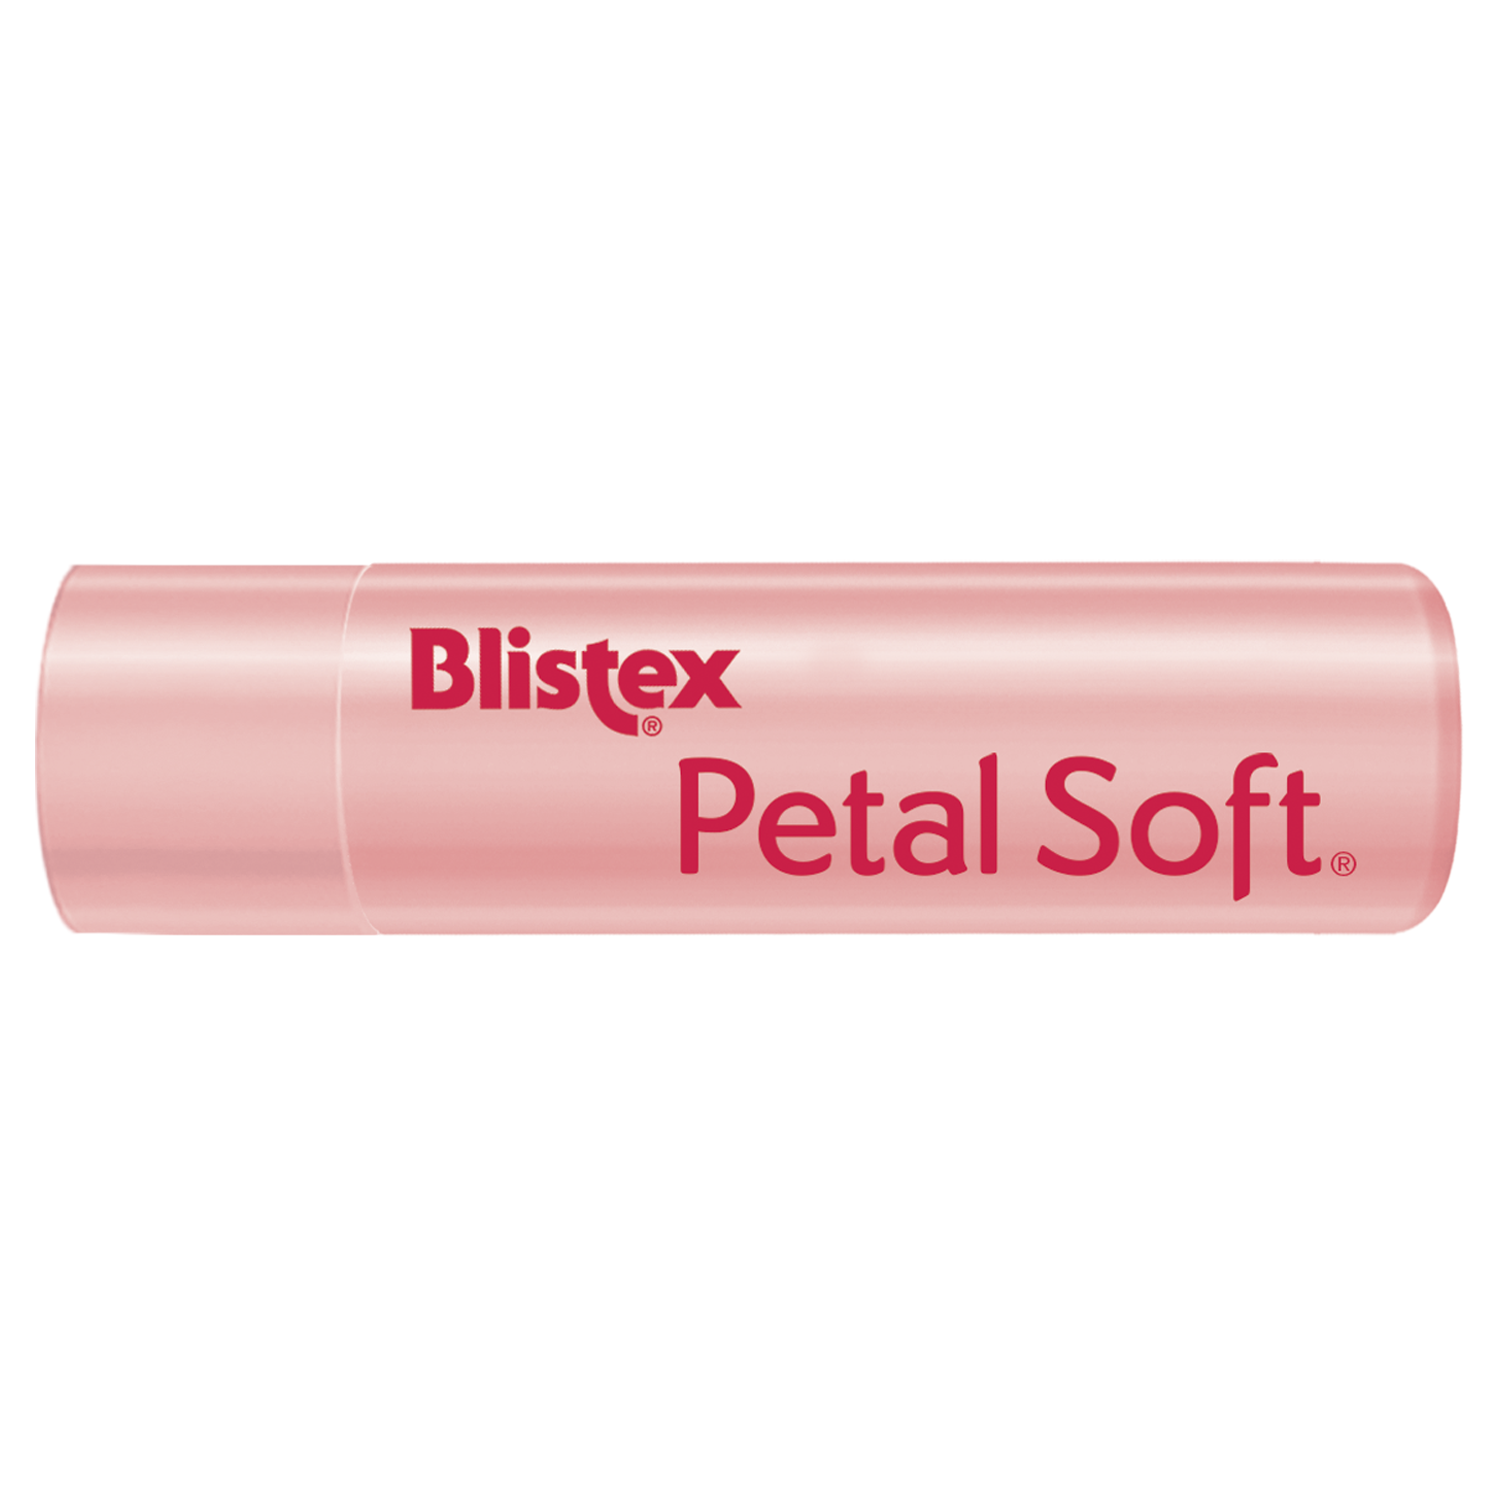 Blistex Petal Soft Lip Balm with Natural Flower Extracts - image 4 of 4